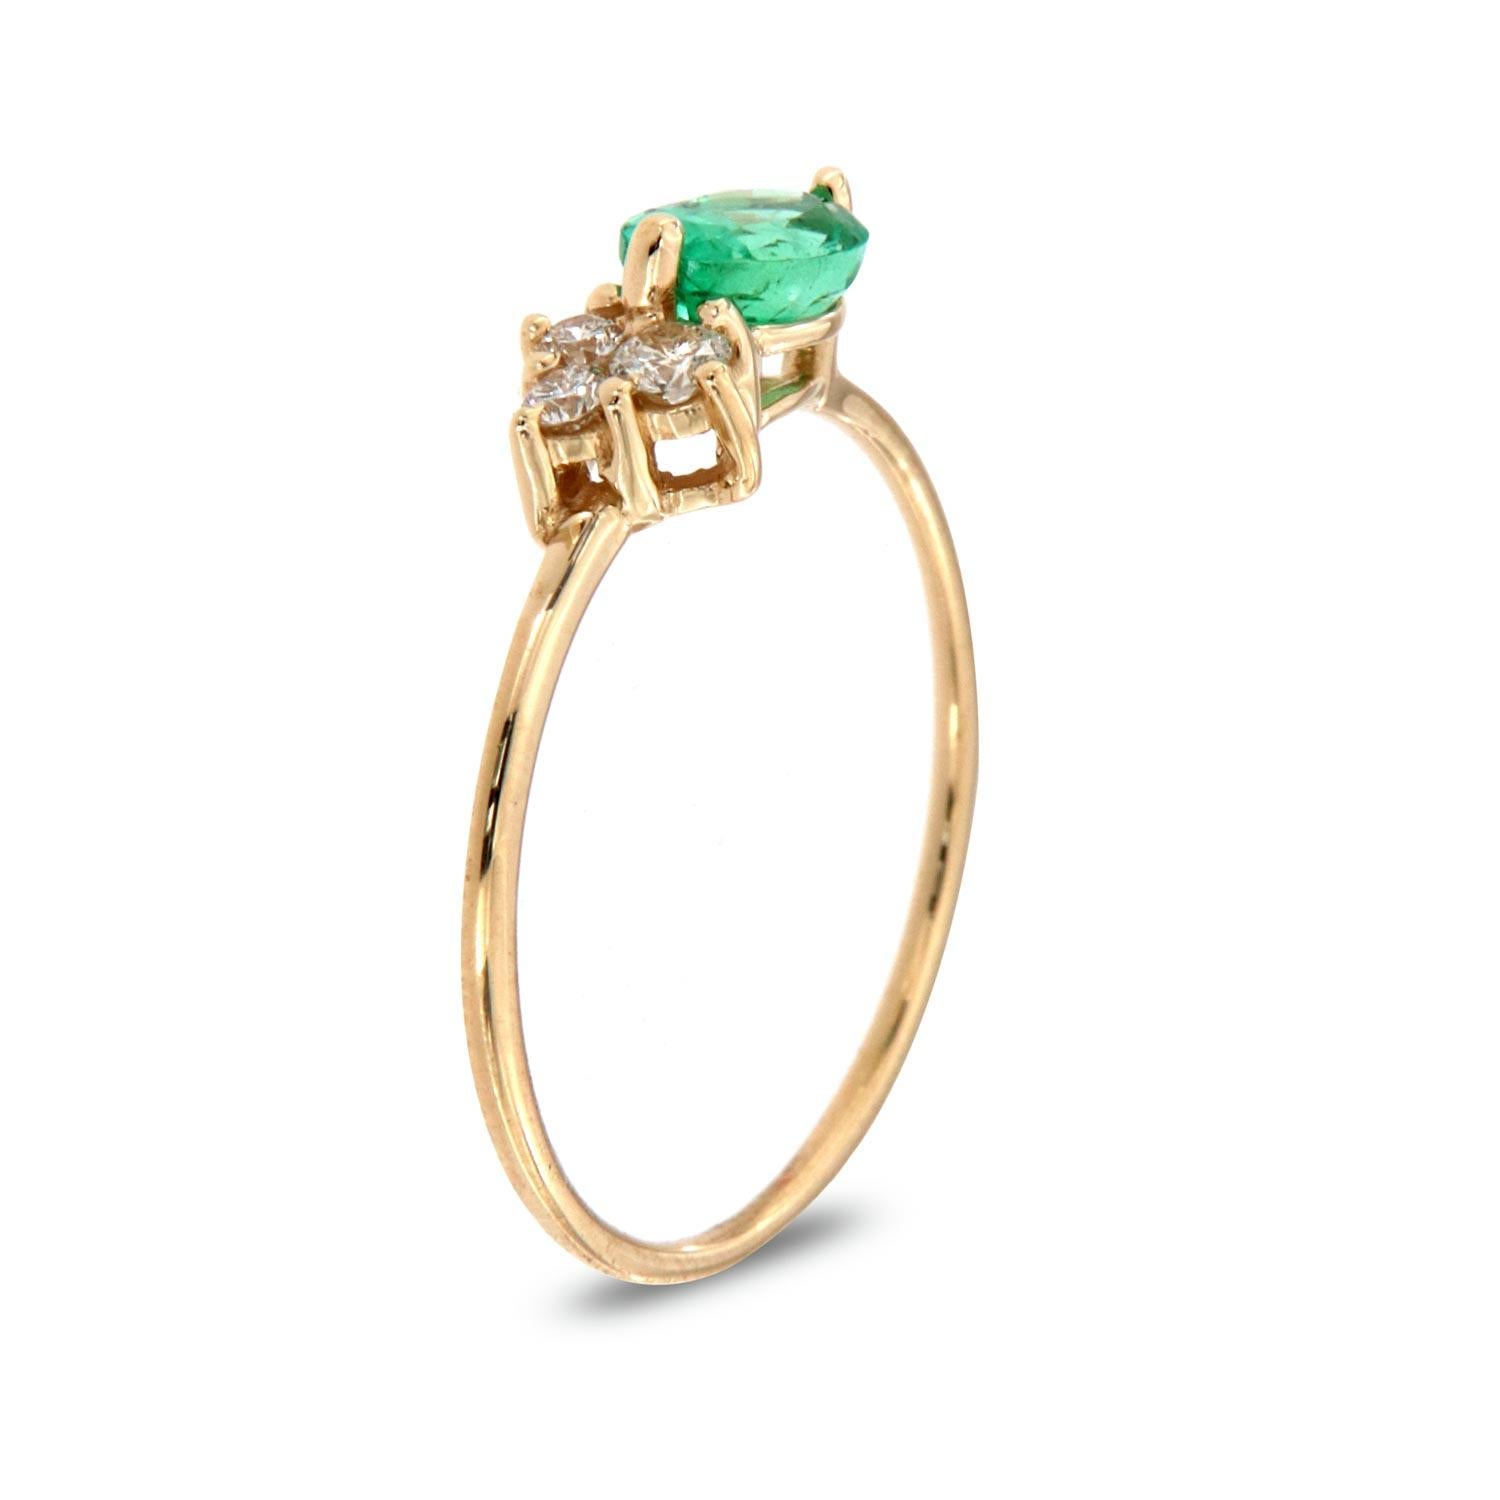 This petite rustic ring is impressive in its vintage appeal, featuring a natural green oval emerald, accented with a cluster of round brilliant diamonds. Experience the difference in person!

Product details: 

Center Gemstone Type: Emerald
Center